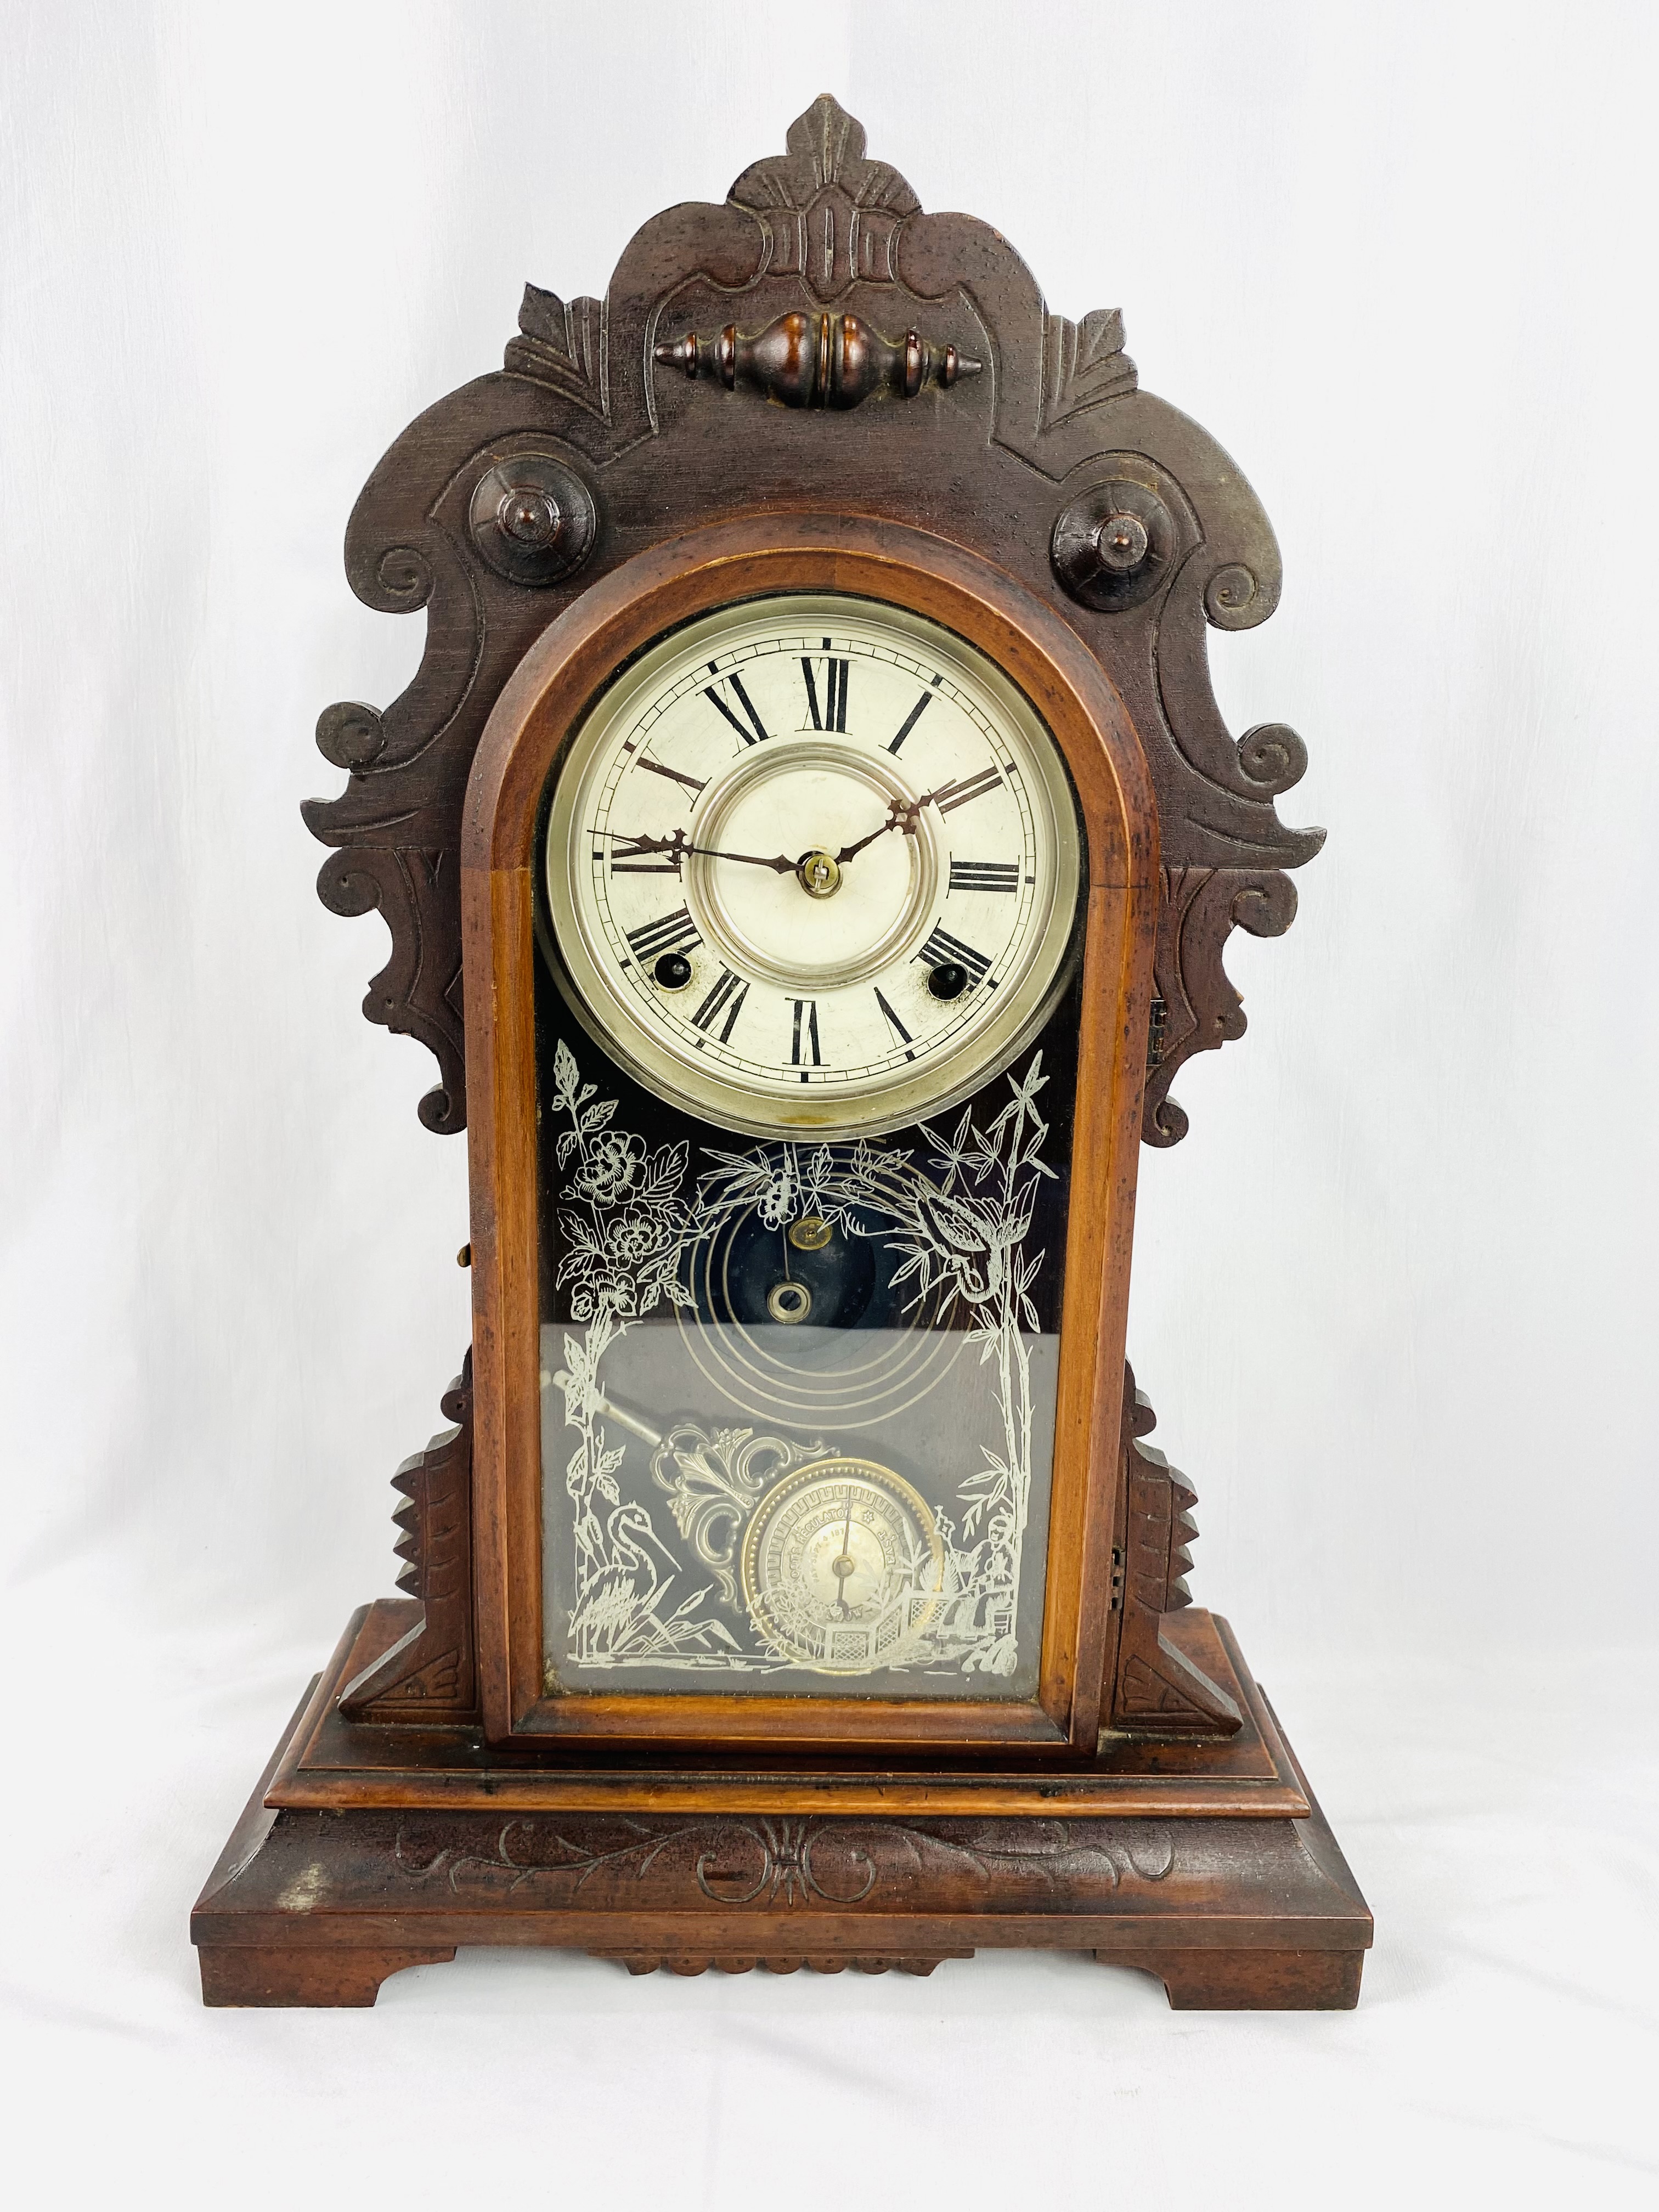 Wood cased mantel clock together with a wall mounted barometer - Image 2 of 6